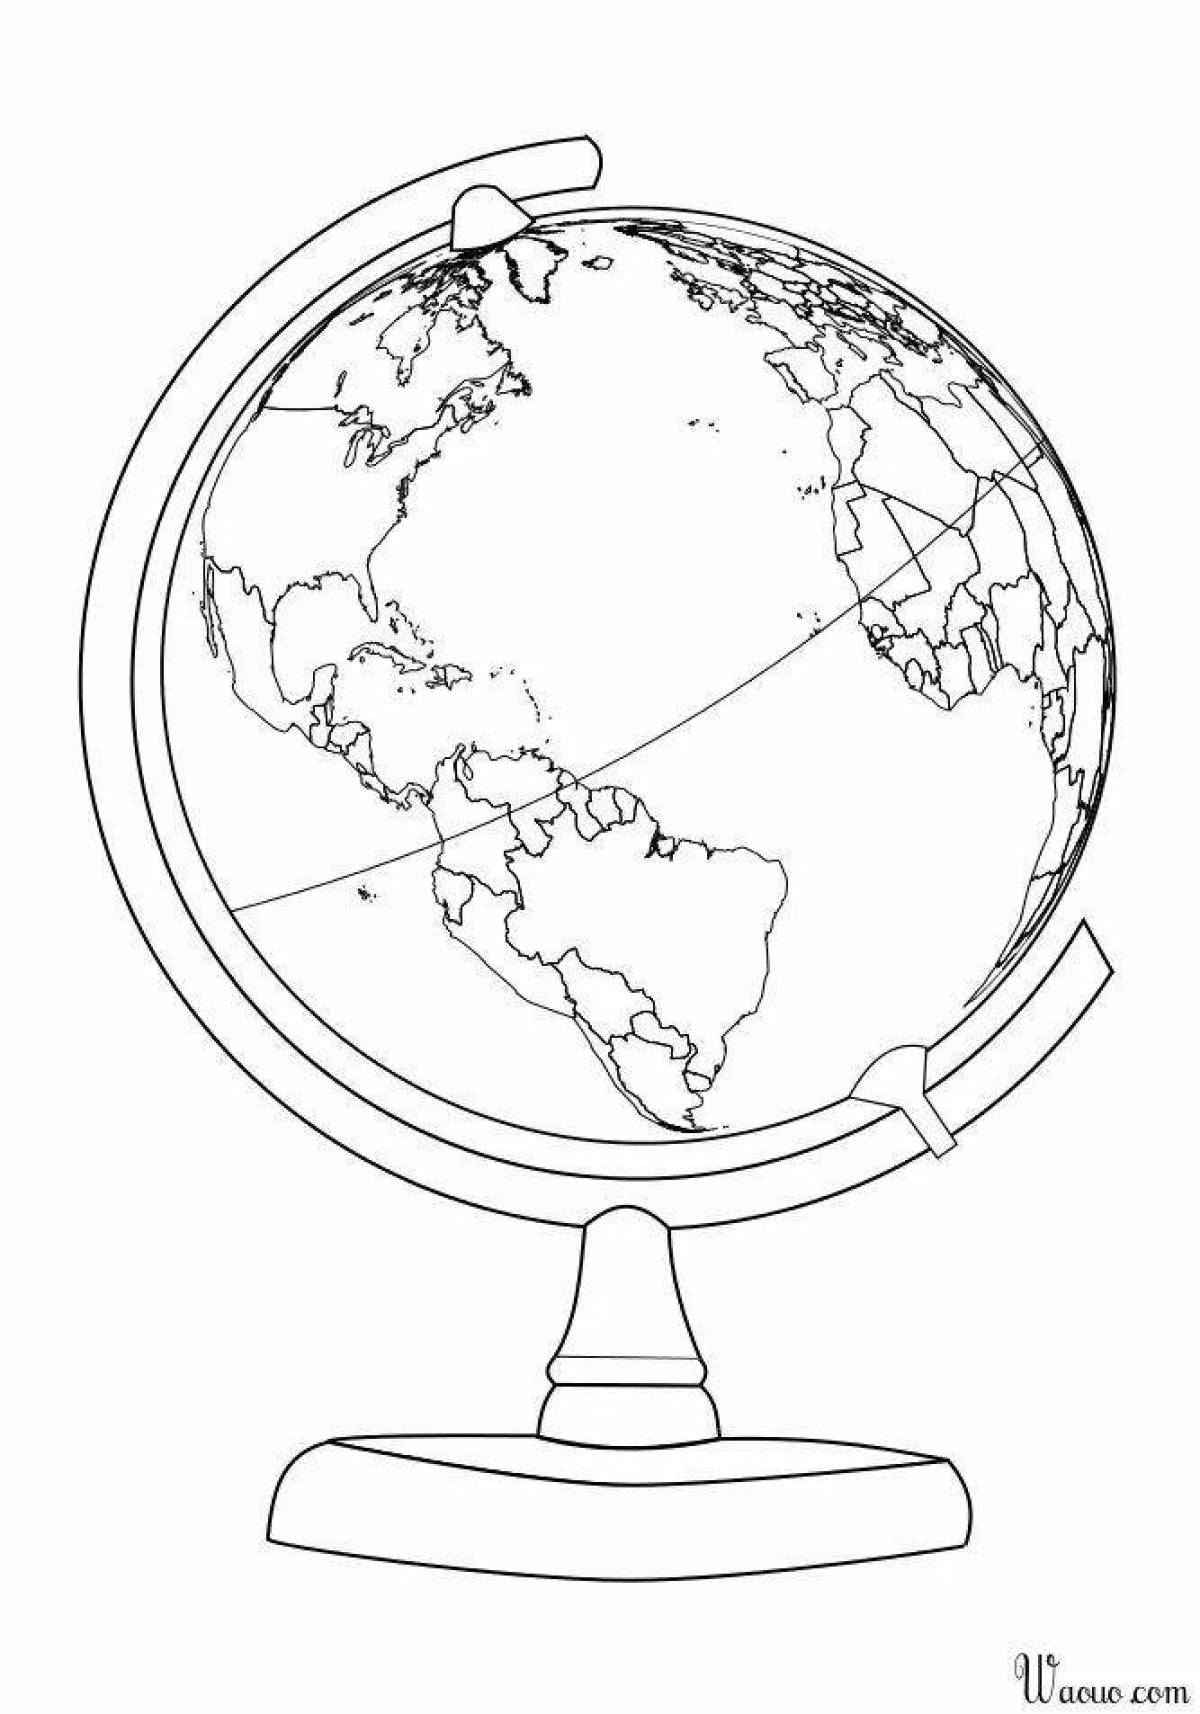 Coloring page gentle globe